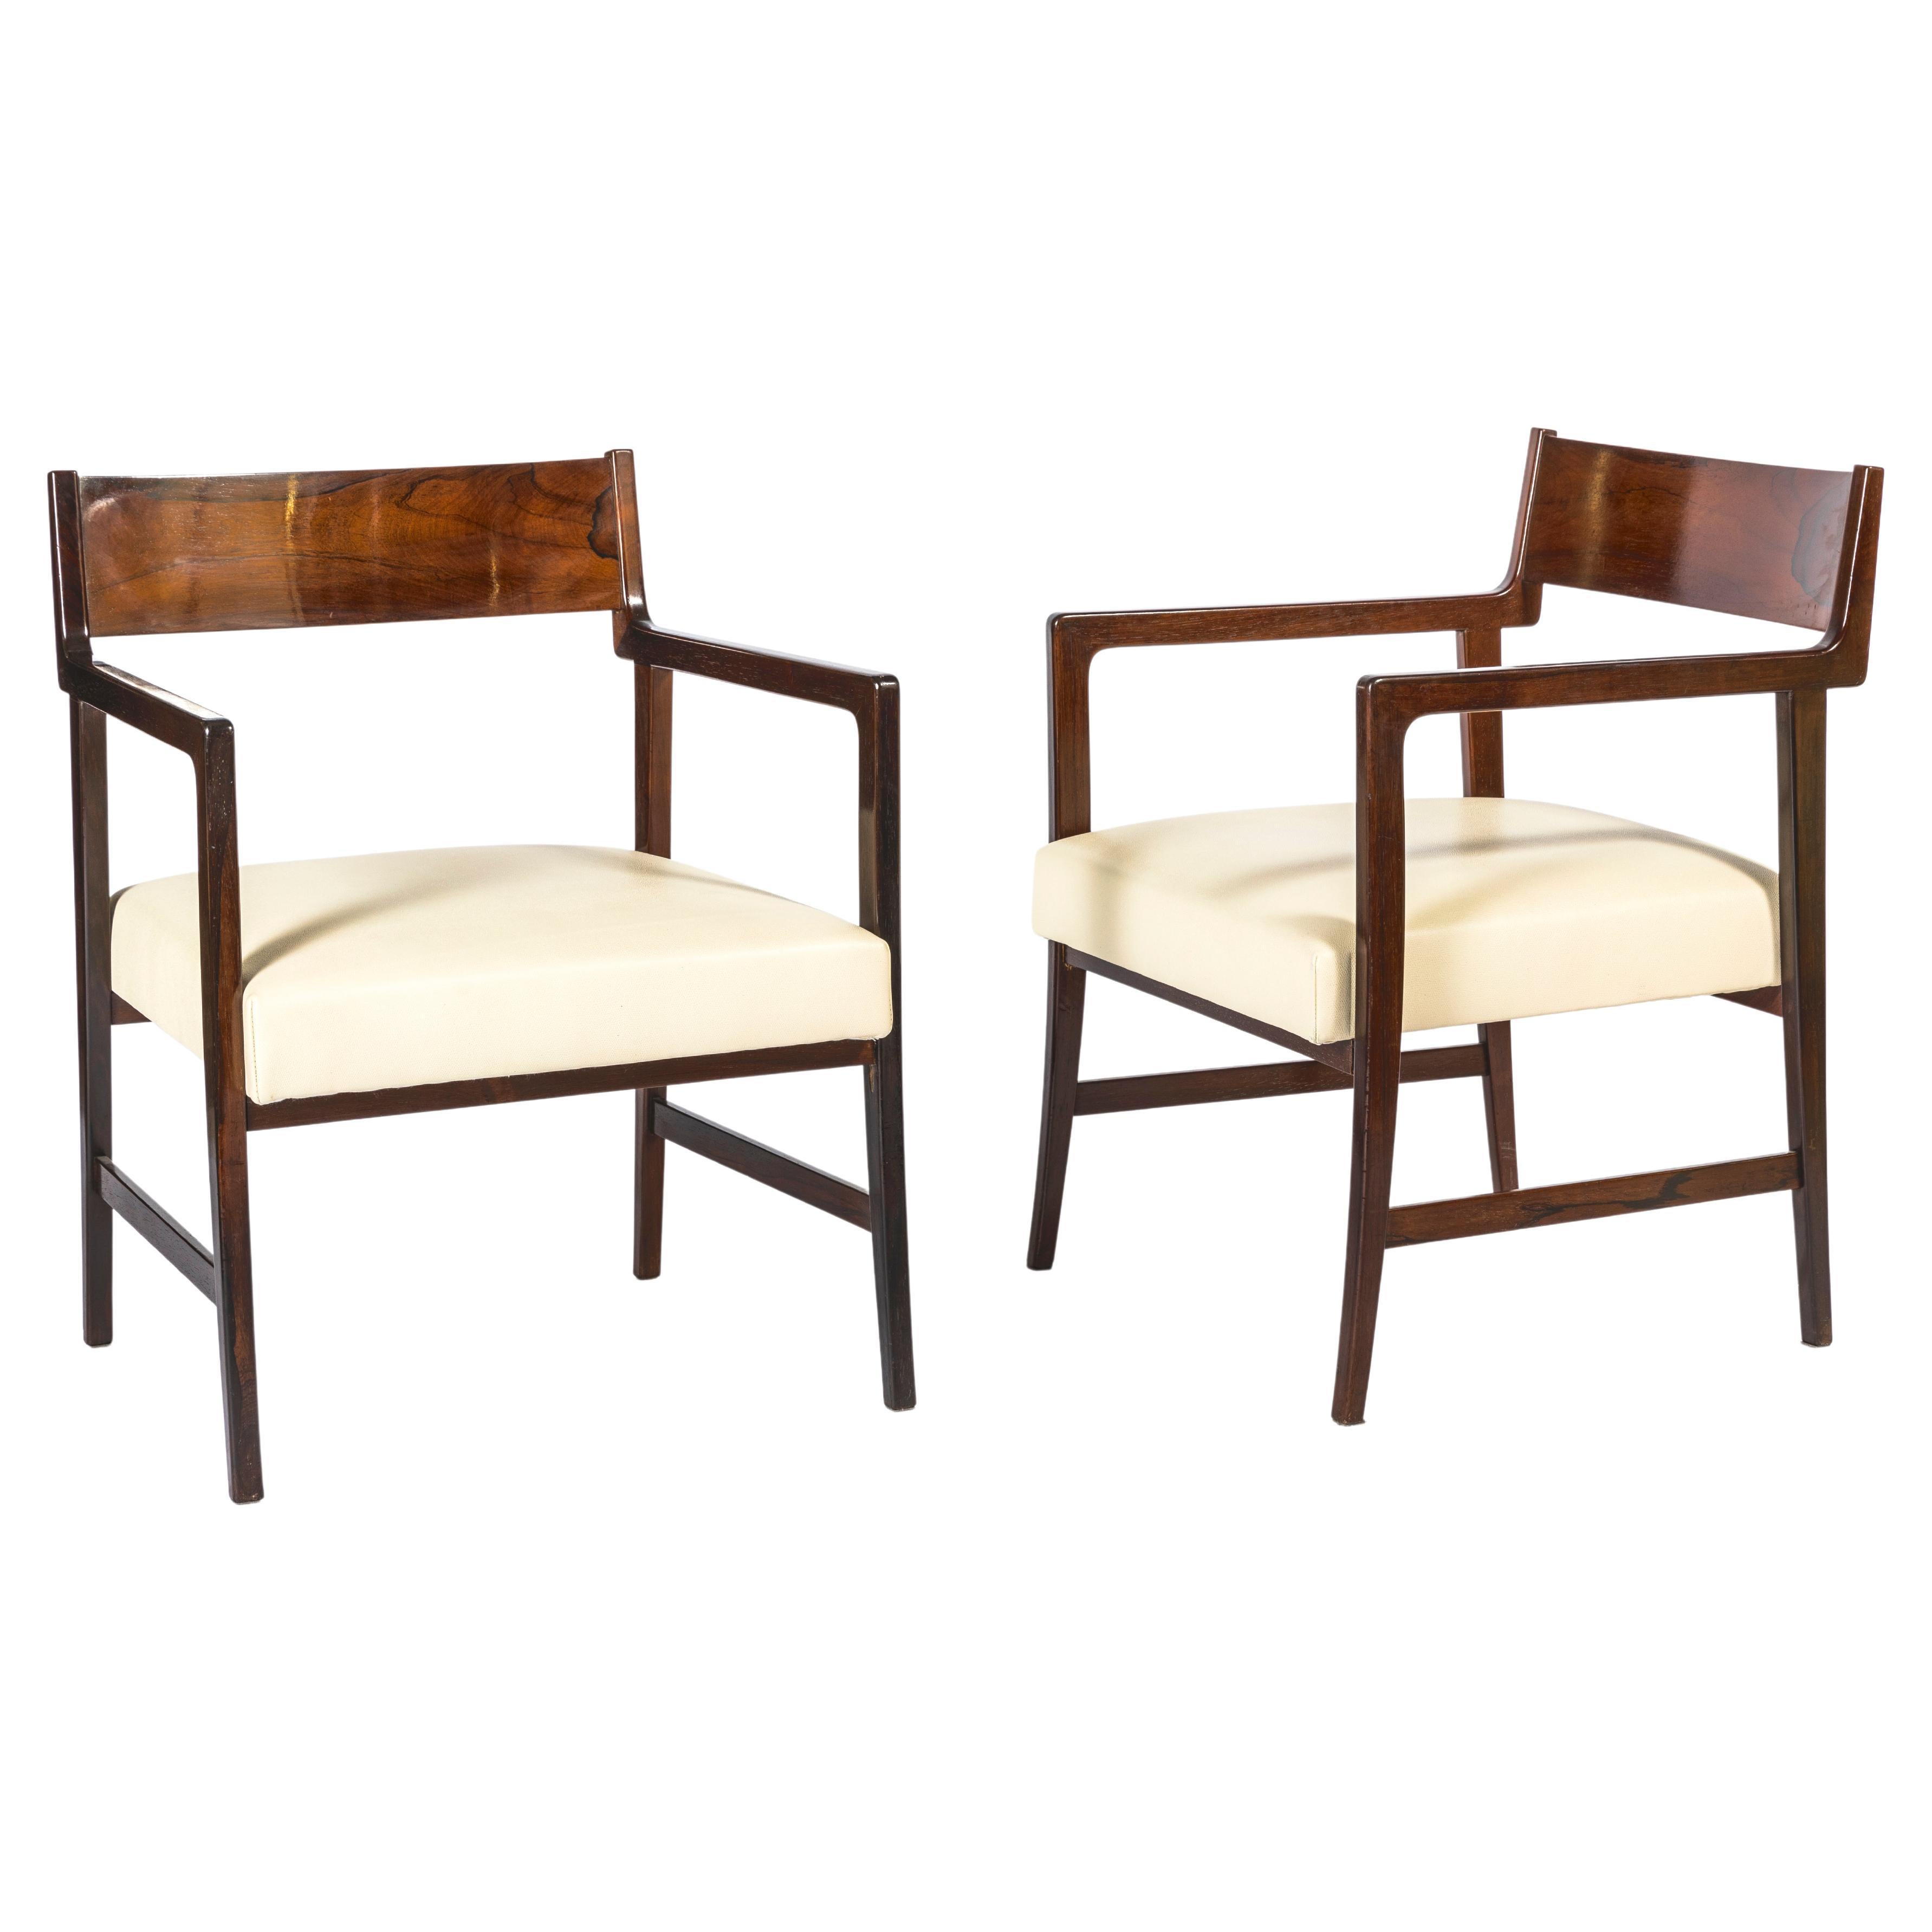 Pair of Armchairs by Joaquim Tenreiro, Wood and Leather, 1950 For Sale